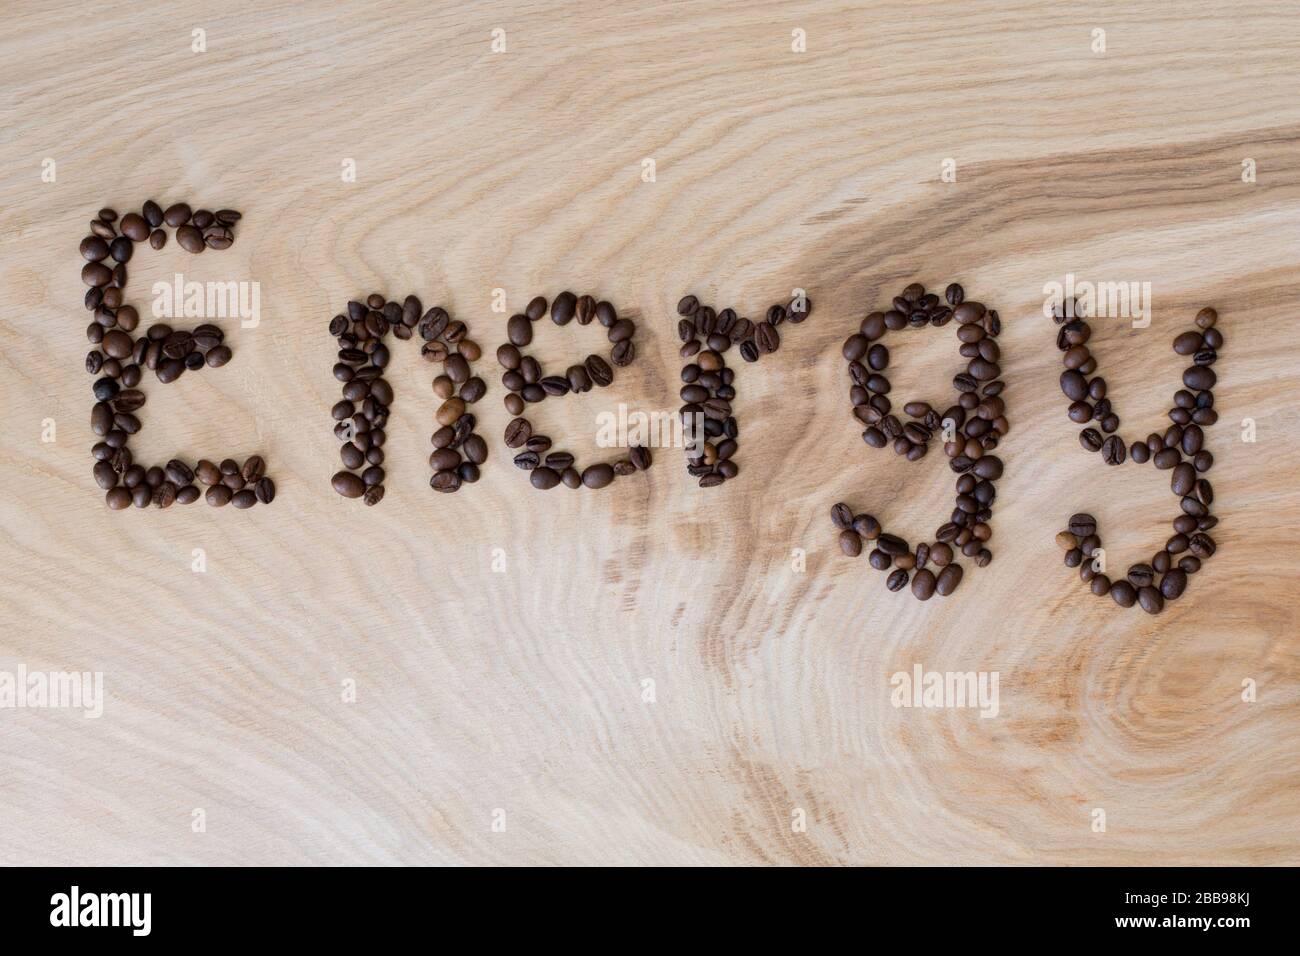 Word energy laid out from coffee grains on wooden background Stock Photo